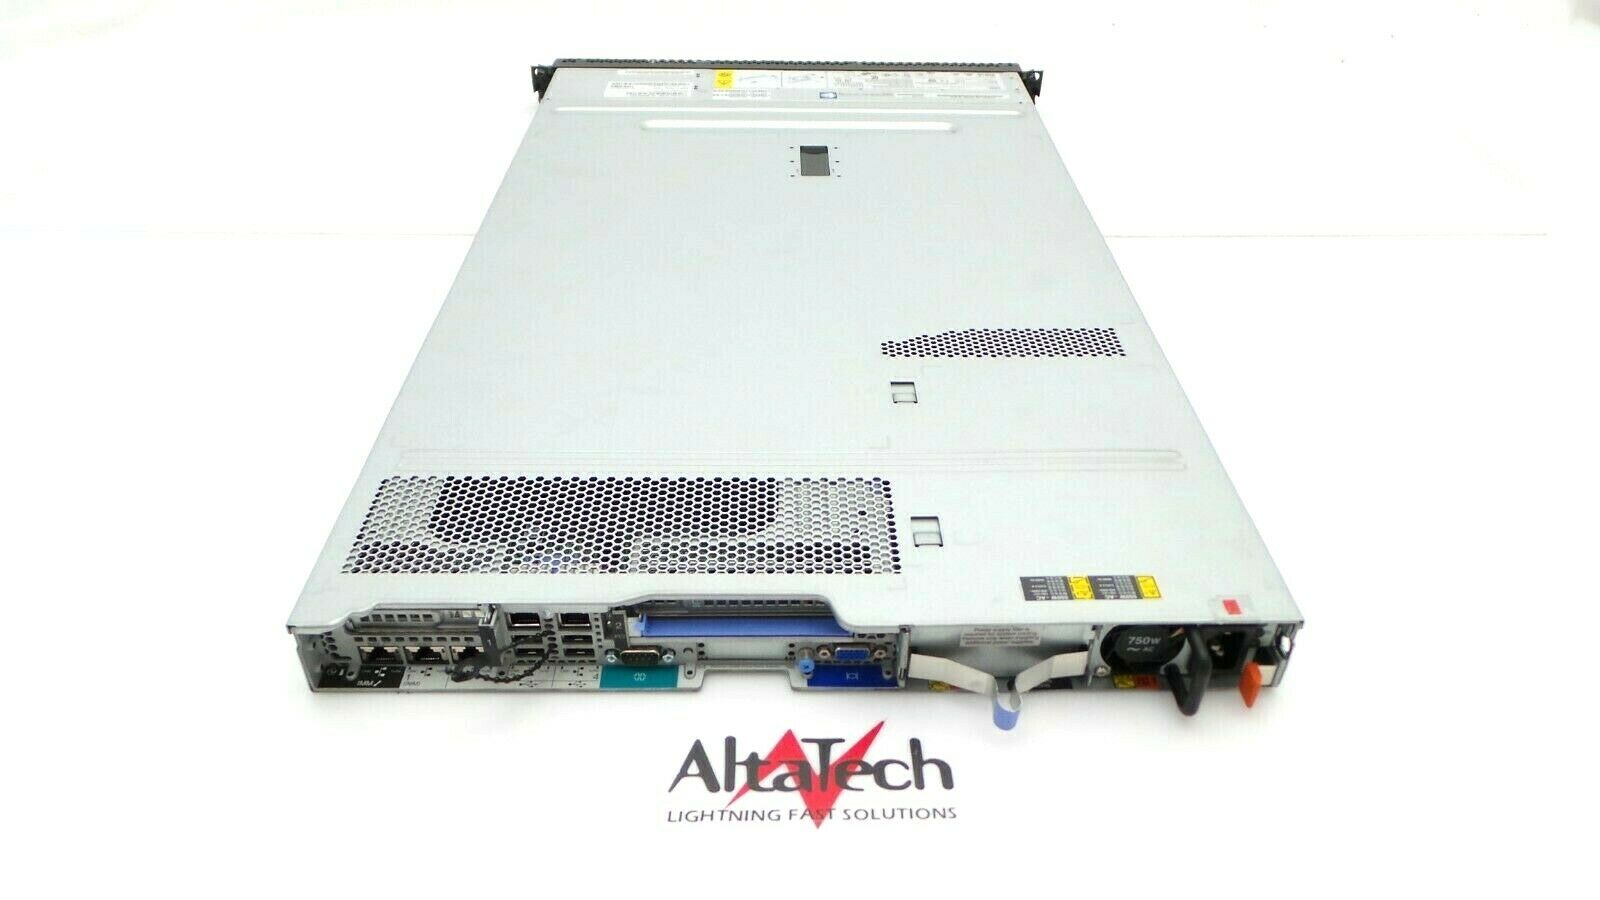 IBM 7042-CR8 System X3550 M4 Hardware Management Console, Used